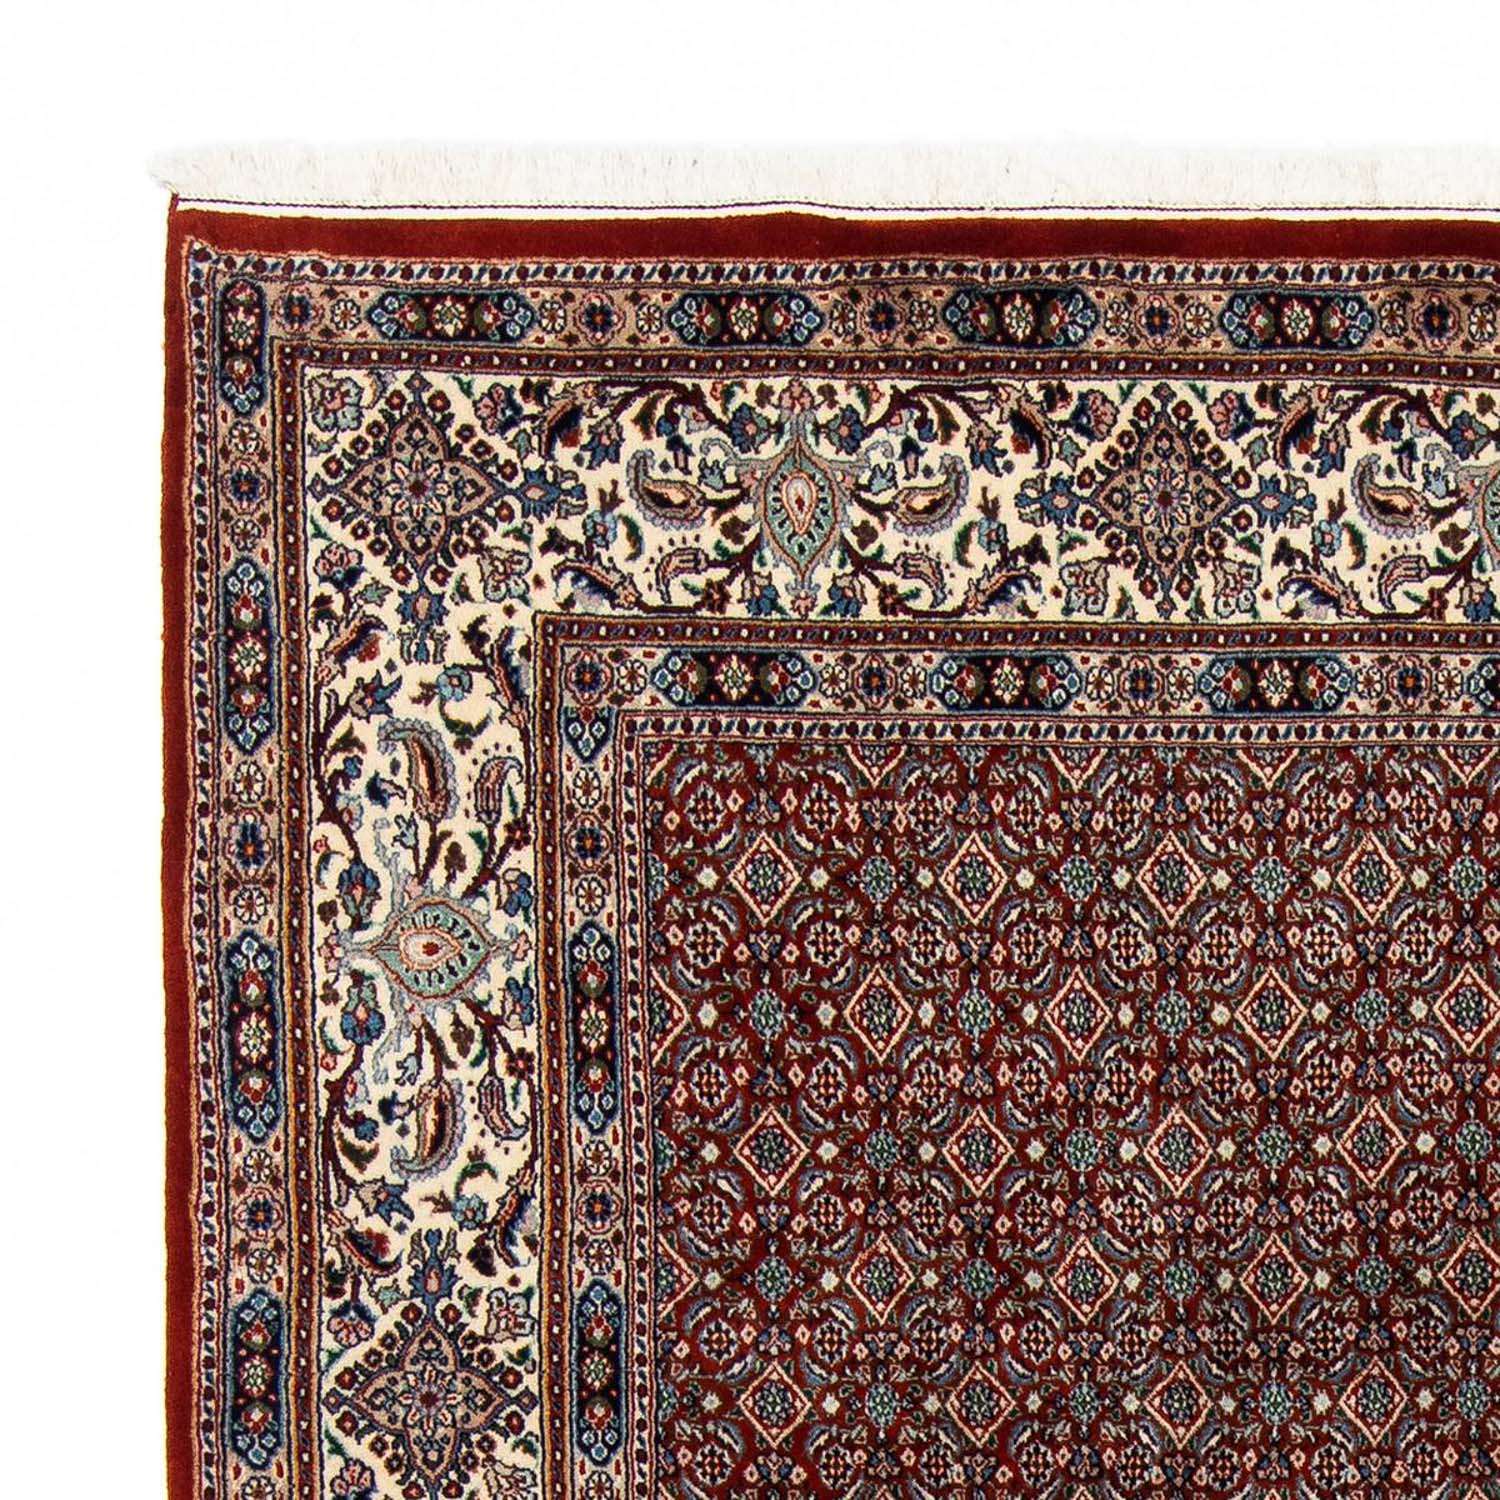 Perser Rug - Classic - 288 x 200 cm - red